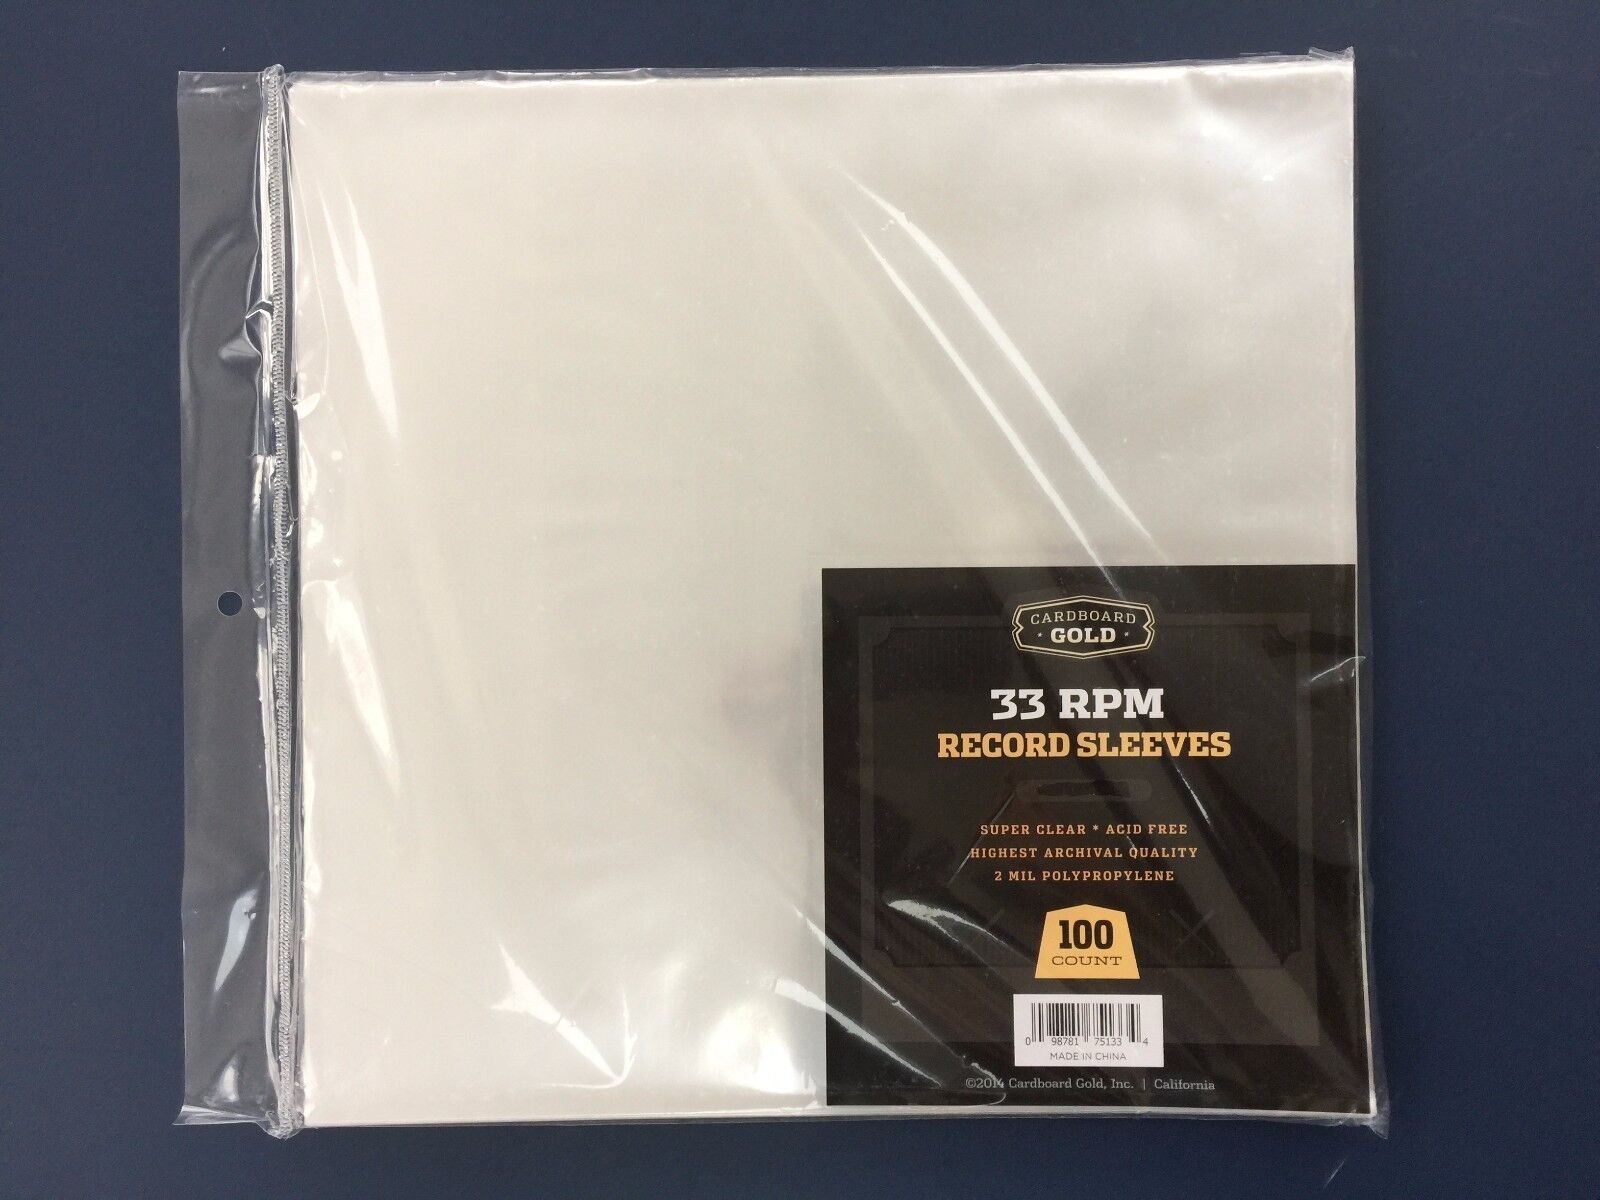 500 Clear Poly Plastic LP Outer Sleeves 2 Mil 12" Vinyl 33rpm Record Album Cover Card Board Gold 33 RPM RECORD SLEEVES